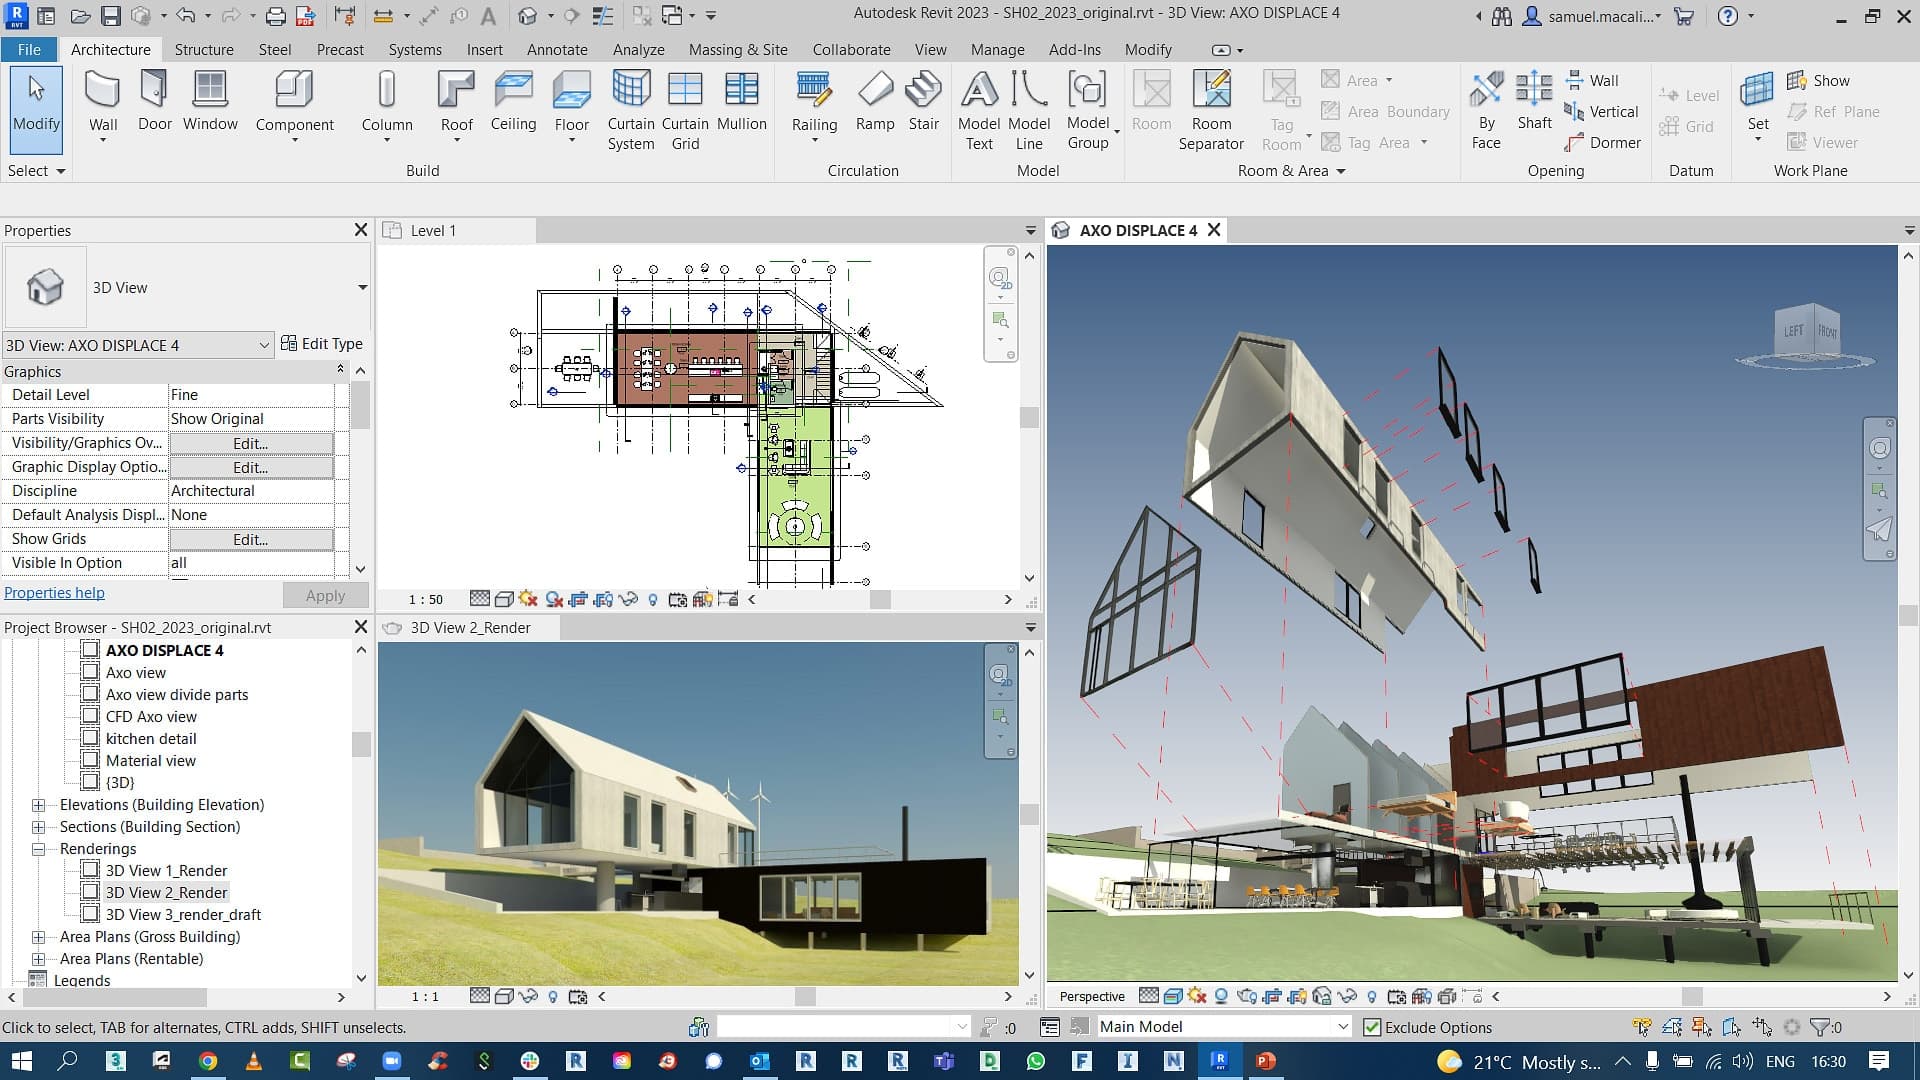 A Revit model in 3 viewports showings a floor plan, an axonometric view and an exploded axonometric view